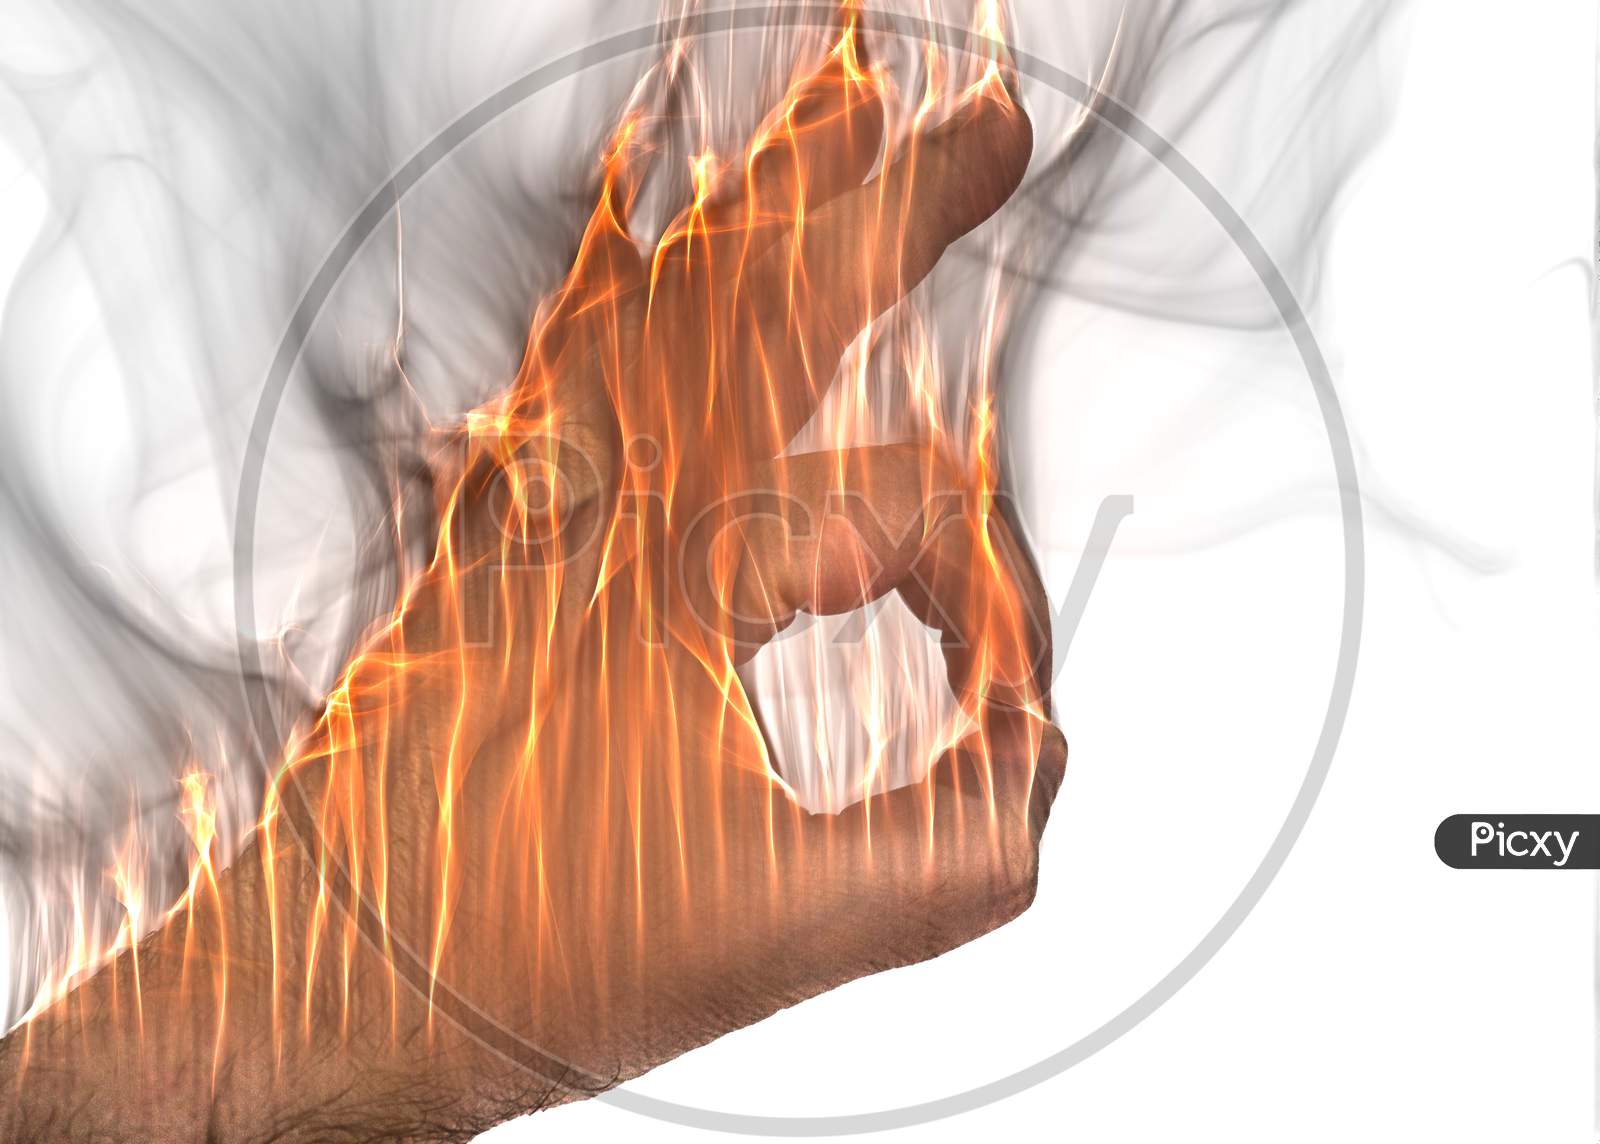 A Human Hand On Fire Burning With Orange Flames And Some Smoke In Front Of A Bright Background